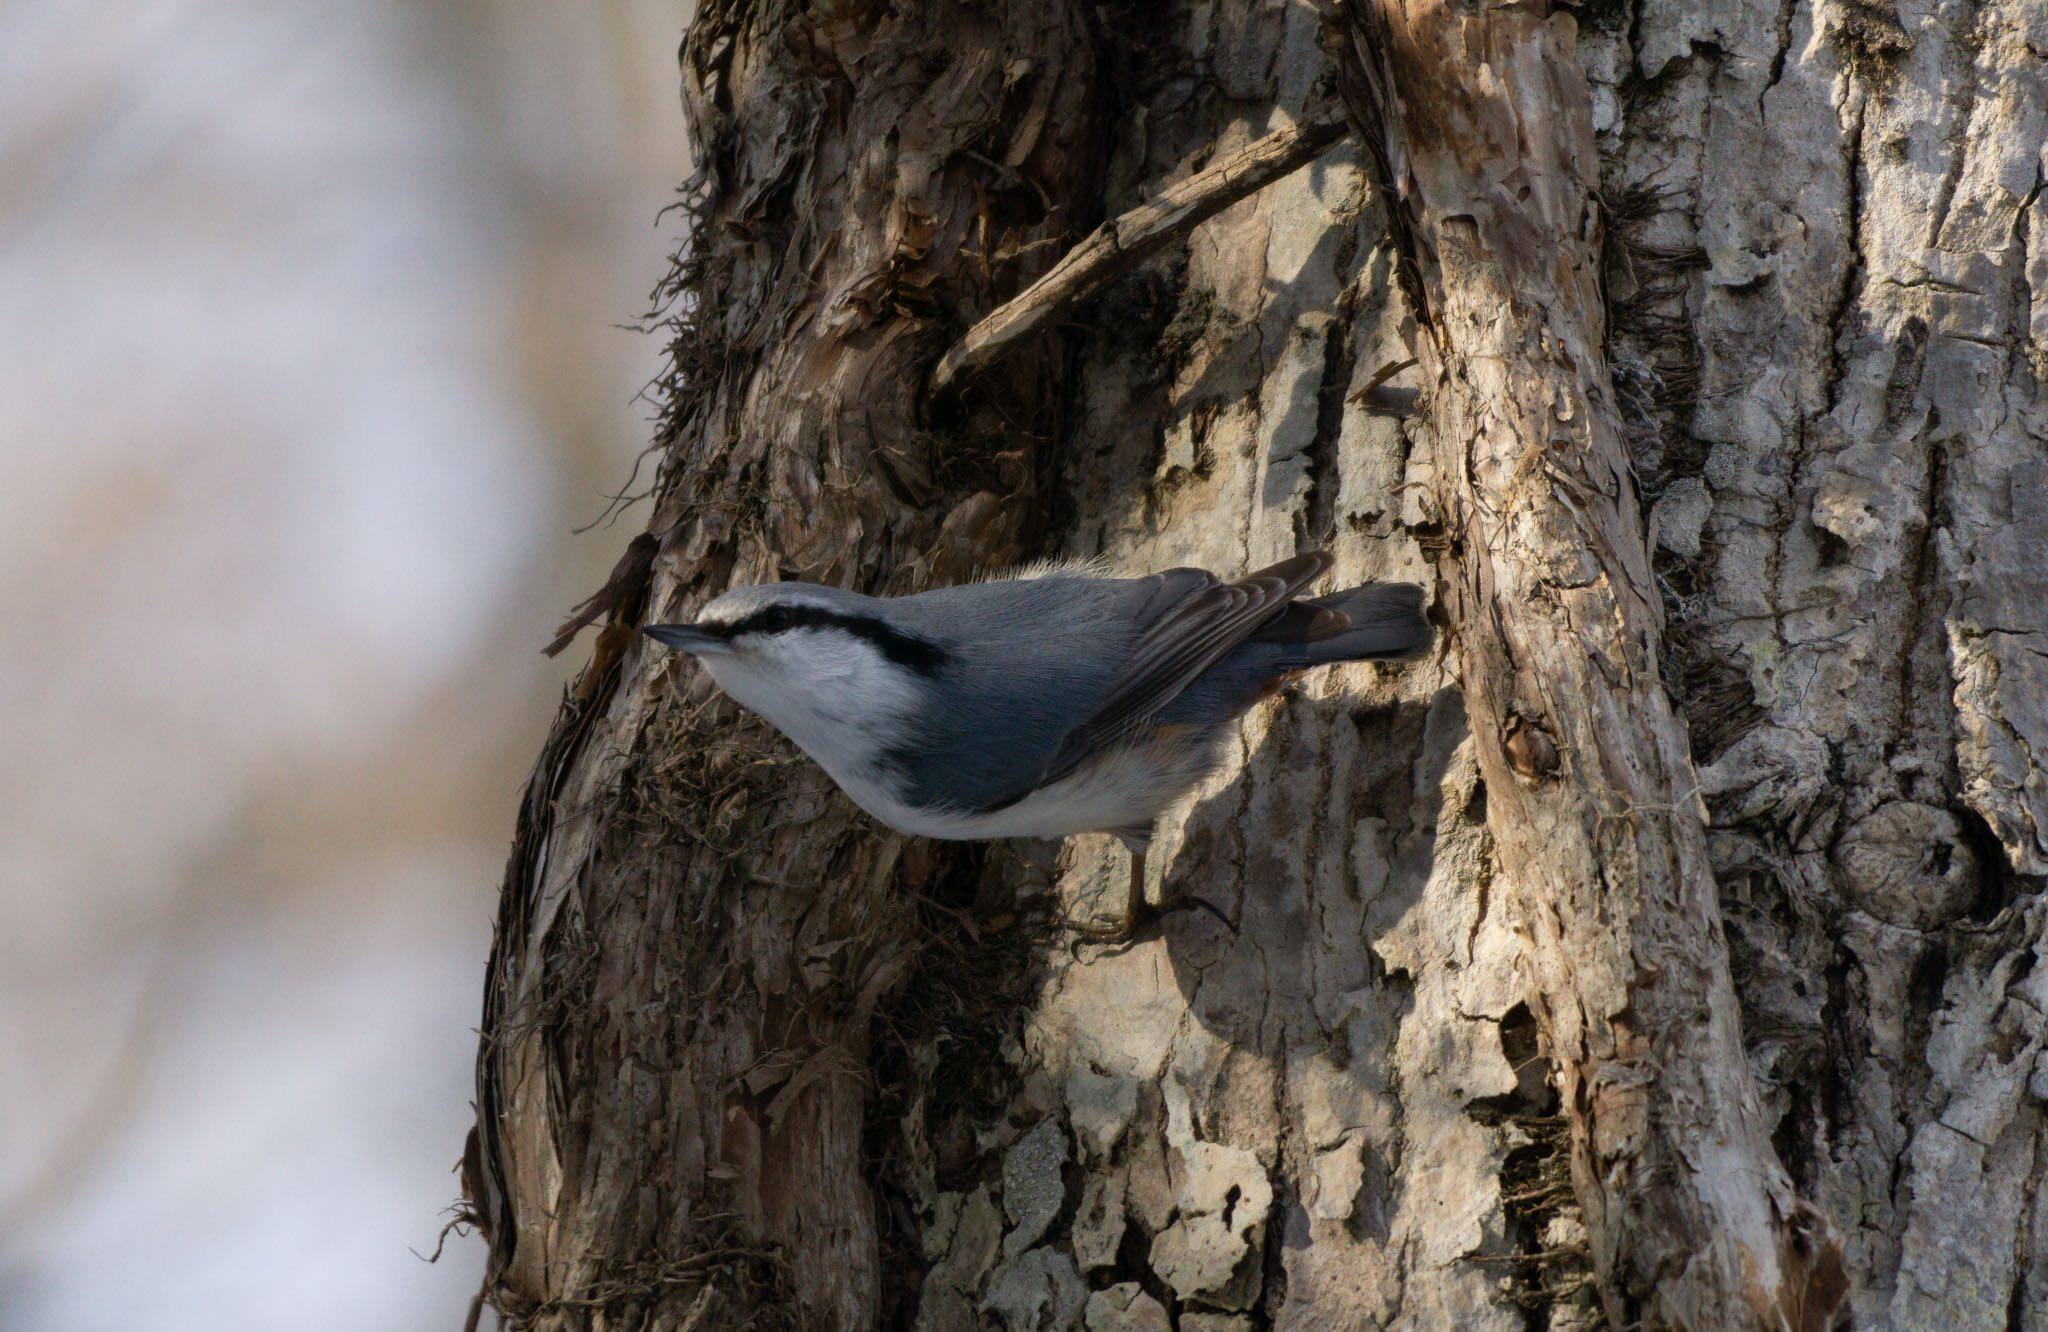 Photo of Eurasian Nuthatch(asiatica) at Tomakomai Experimental Forest by マルCU